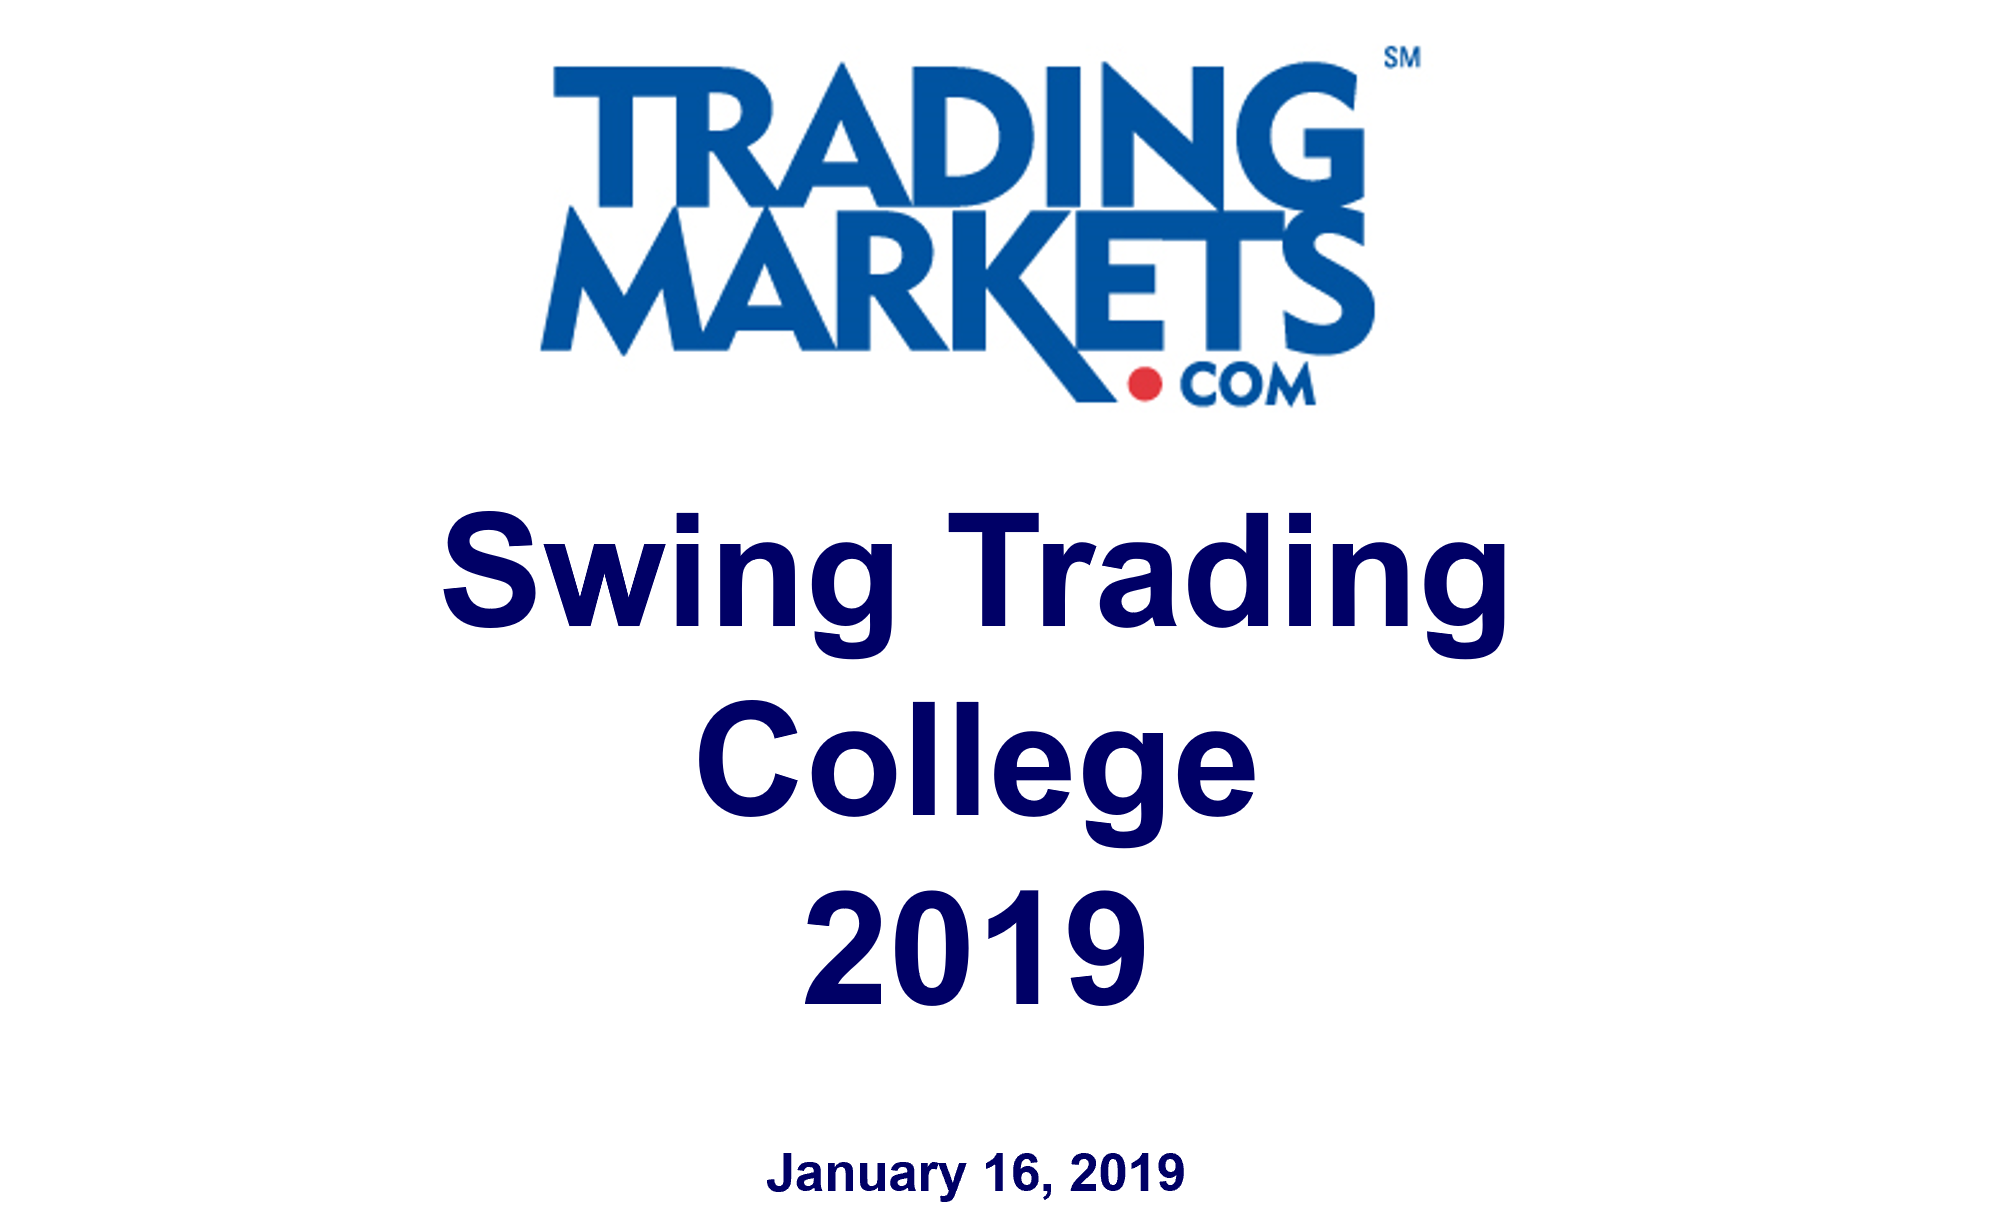 What Is Trading Markets Swing Trading College 2019